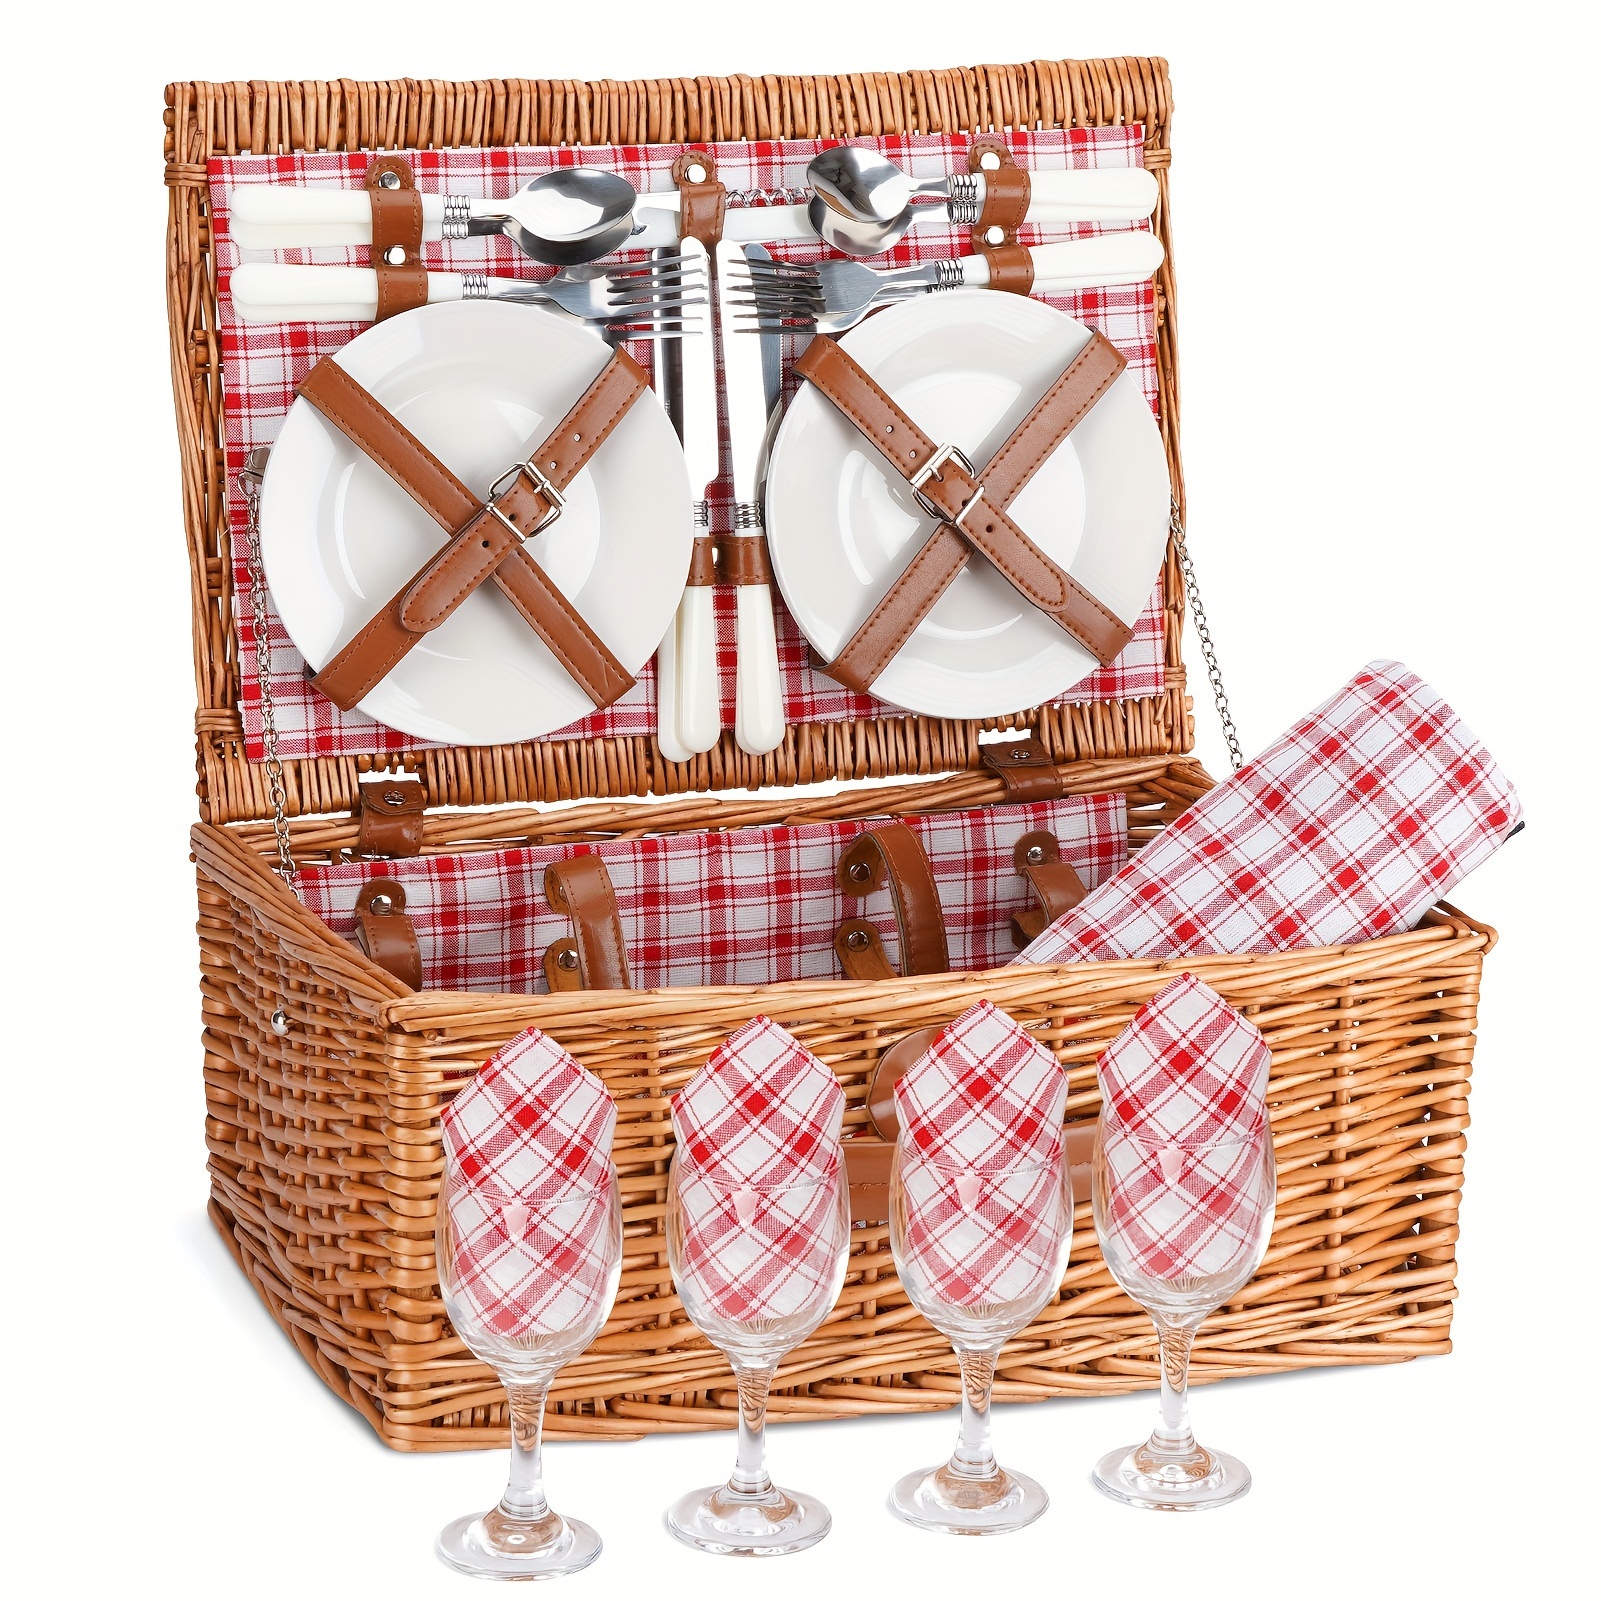 

1pc Wicker Picnic Basket For 4 Person, With Waterproof Picnic Blanket, Outdoor Dining Set, Picnic Set